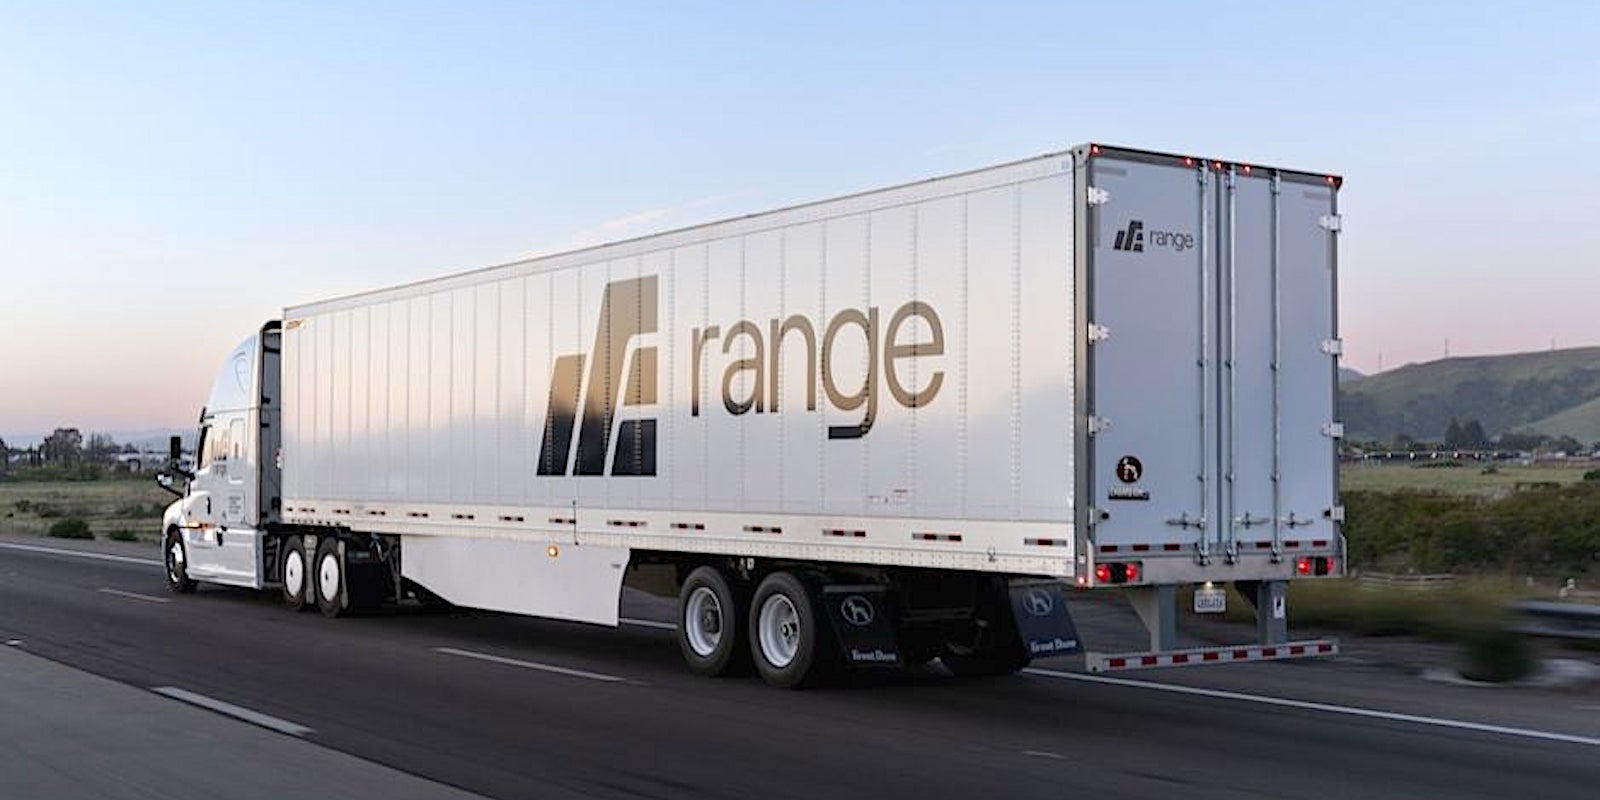 Range Energy’s Trailer Eligible for Up To $120,000 Voucher